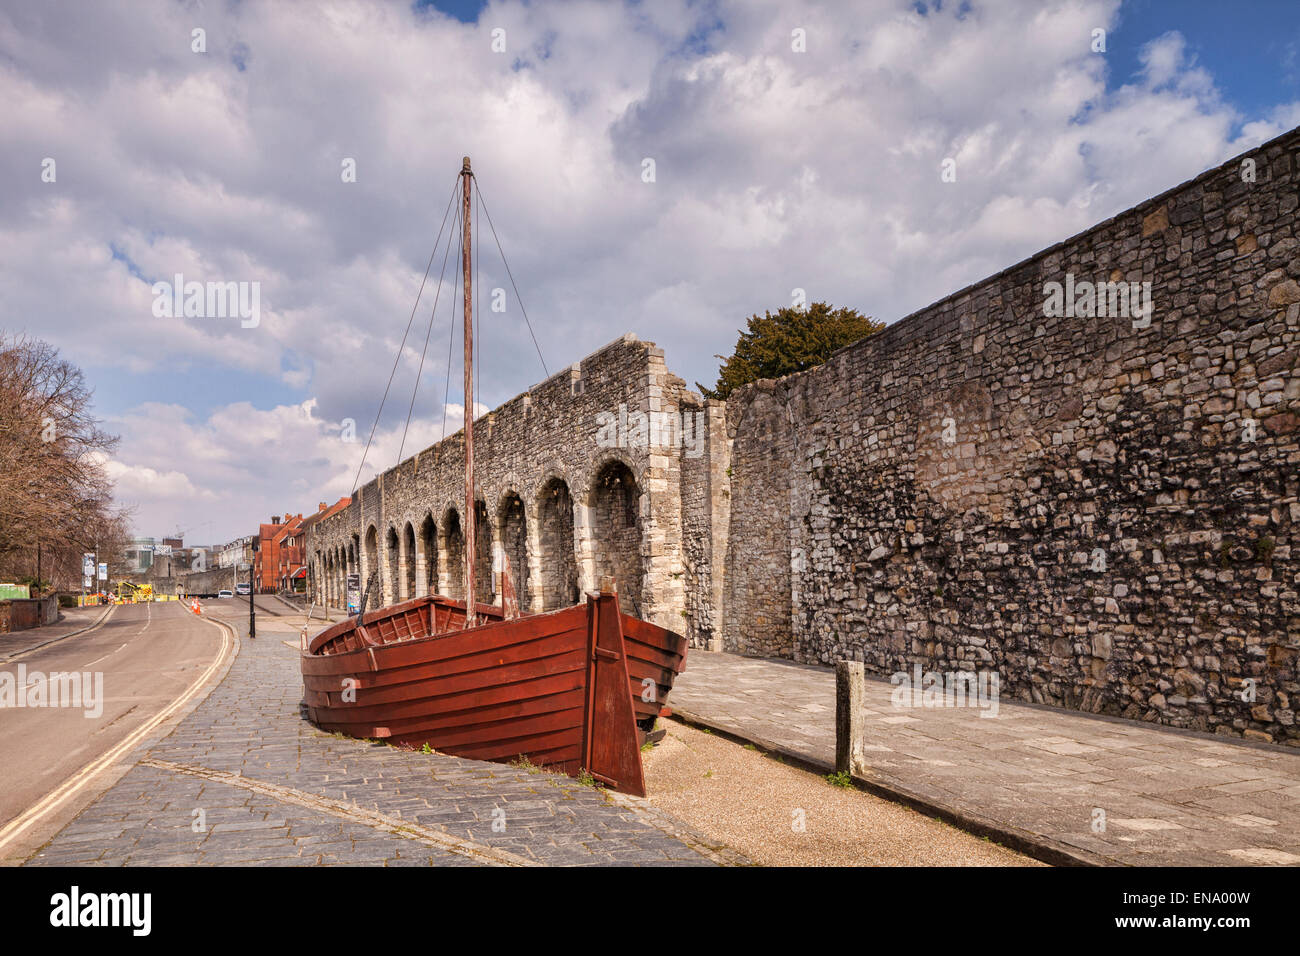 A section of the old city walls of Southampton. A boat has been placed to show where the sea was in medieval times. Southampton, Stock Photo